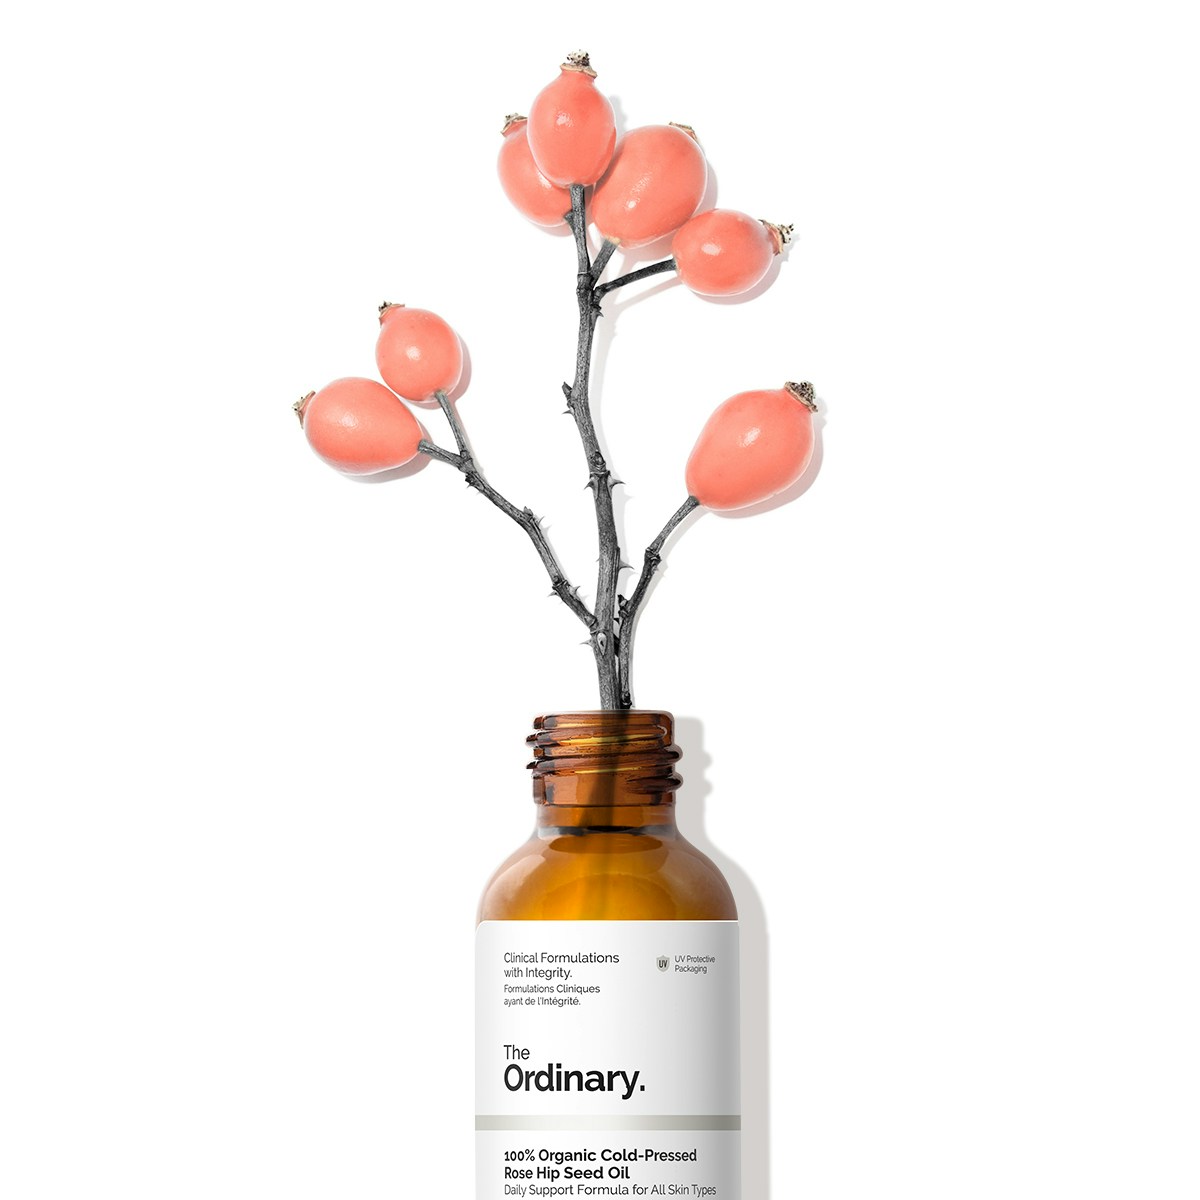 The Ordinary The Ordinary 100% Organic Cold-Pressed Rose Hip Seed Oil 30ml